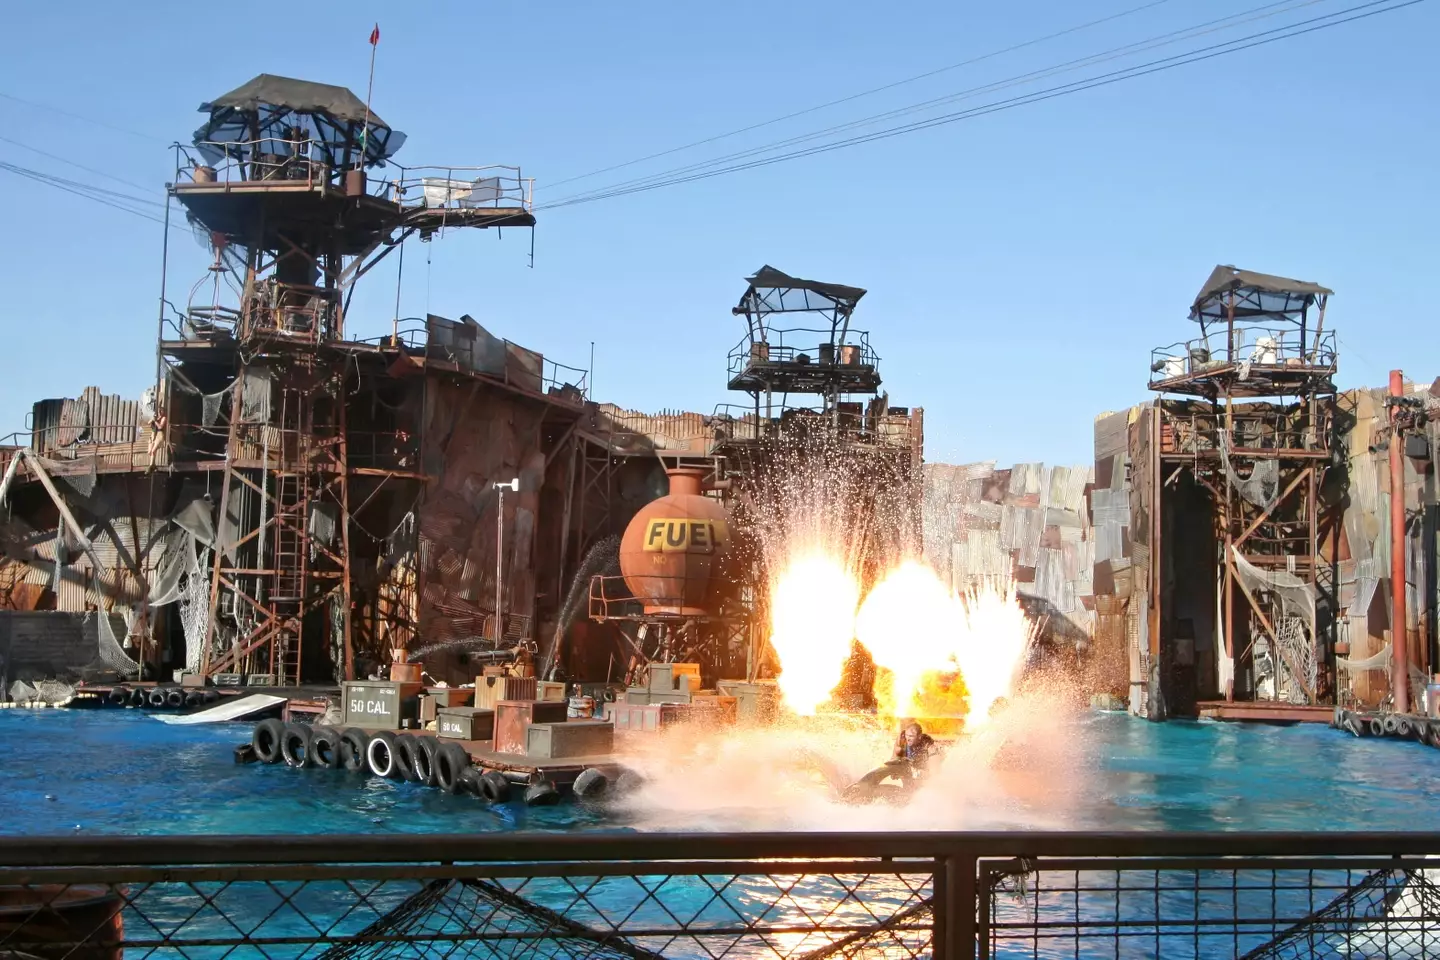 The incident occurred at the WaterWorld show at Universal Studios Hollywood.